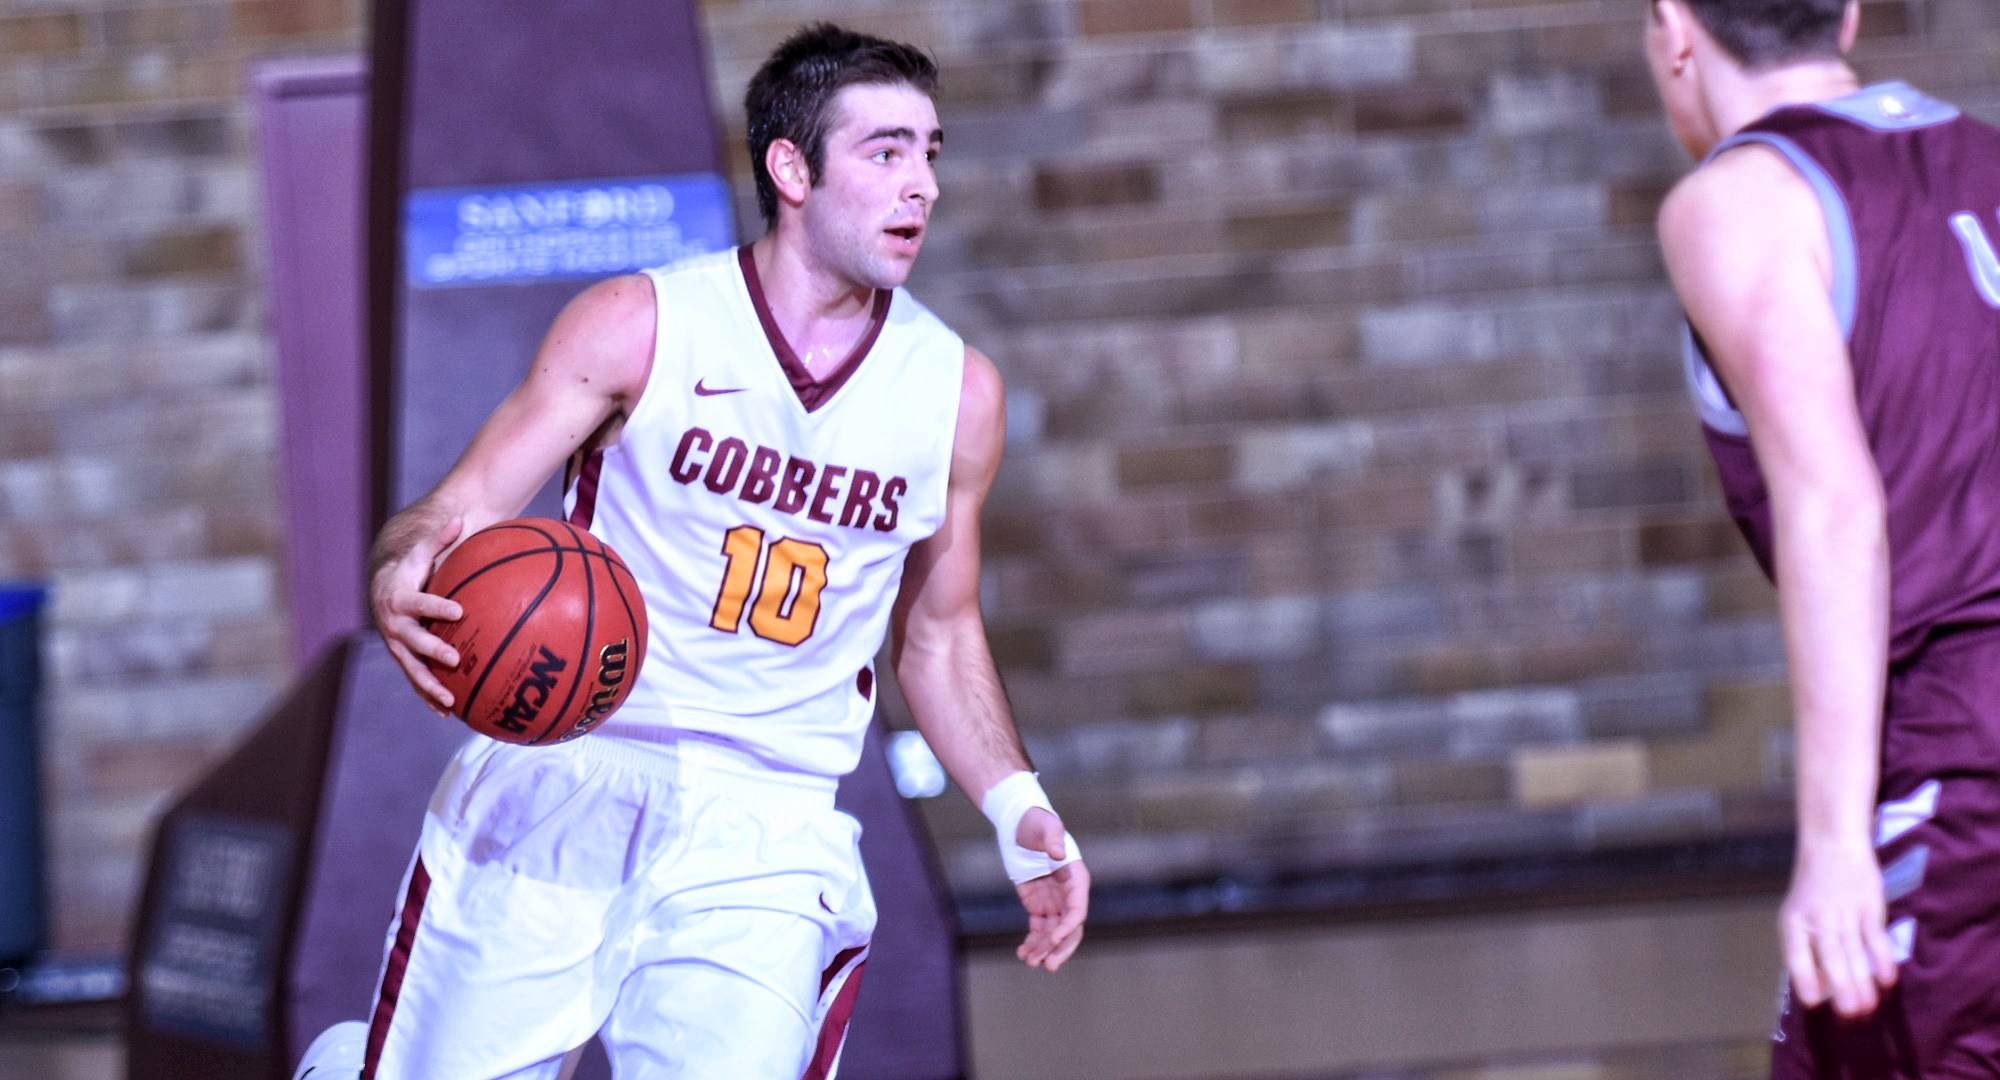 Tommy Schyma dribbles the ball upcourt during the second half of the Cobbers' game with Augsburg. He finished with a game-high 13 points.